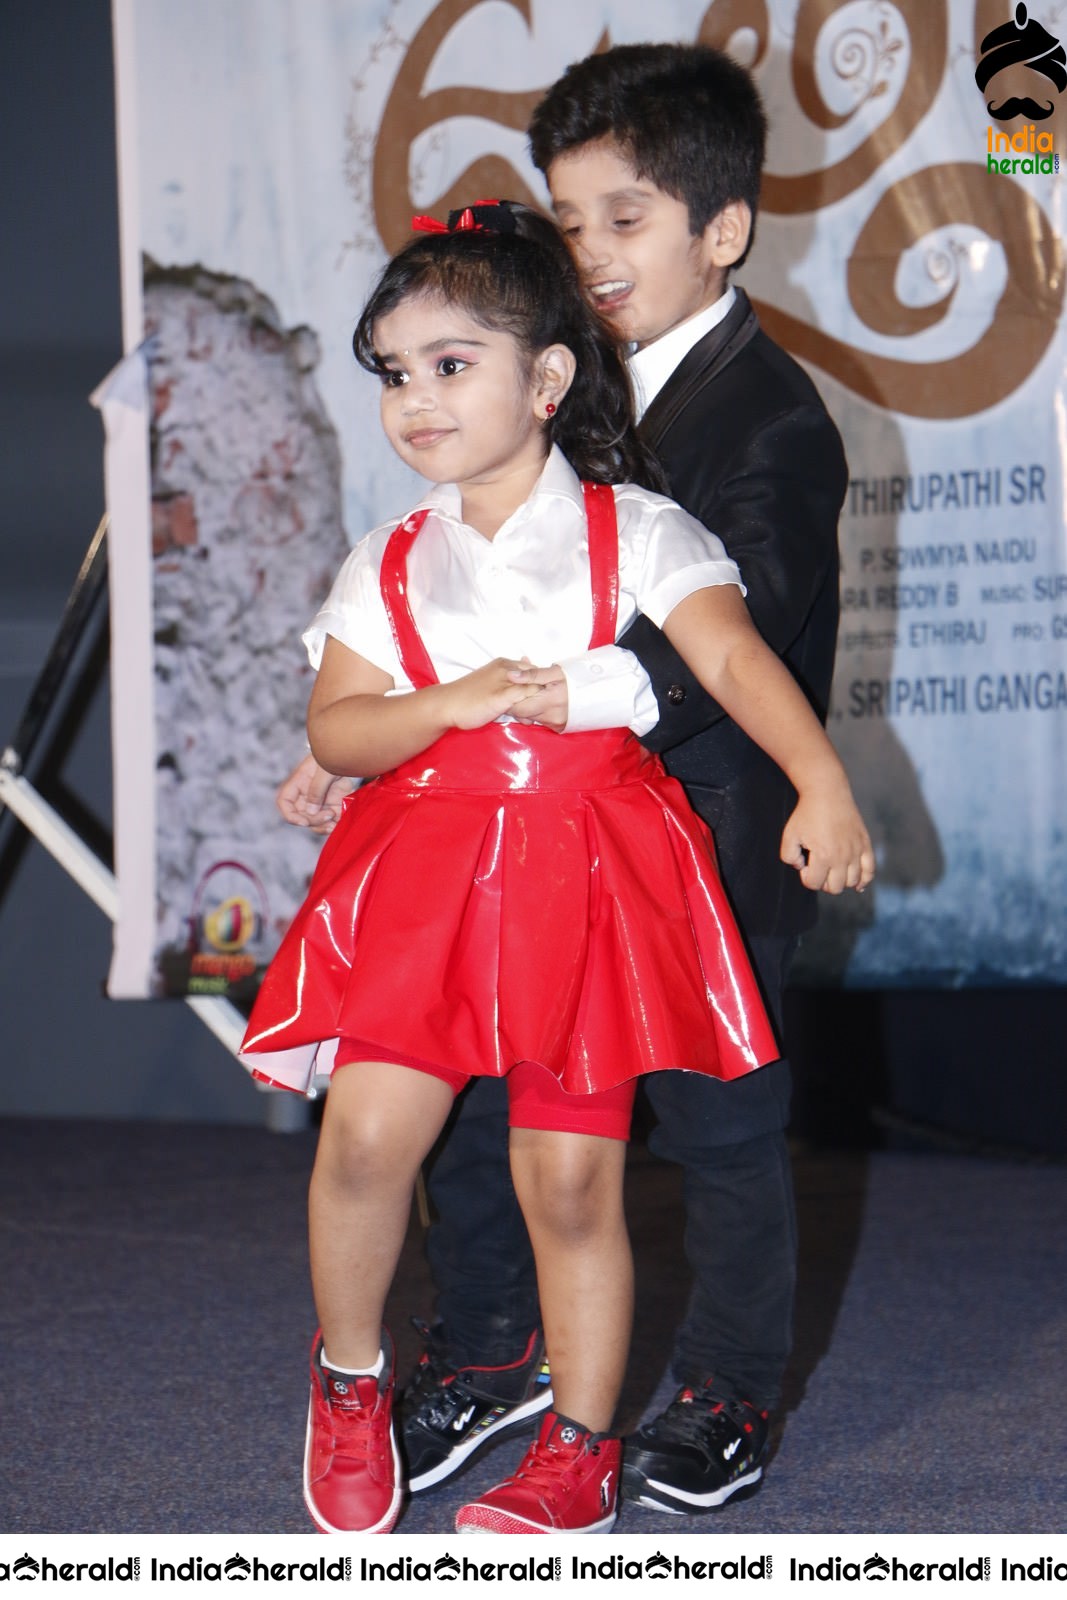 Kids Dance On the Stage at Uthara Event Set 1